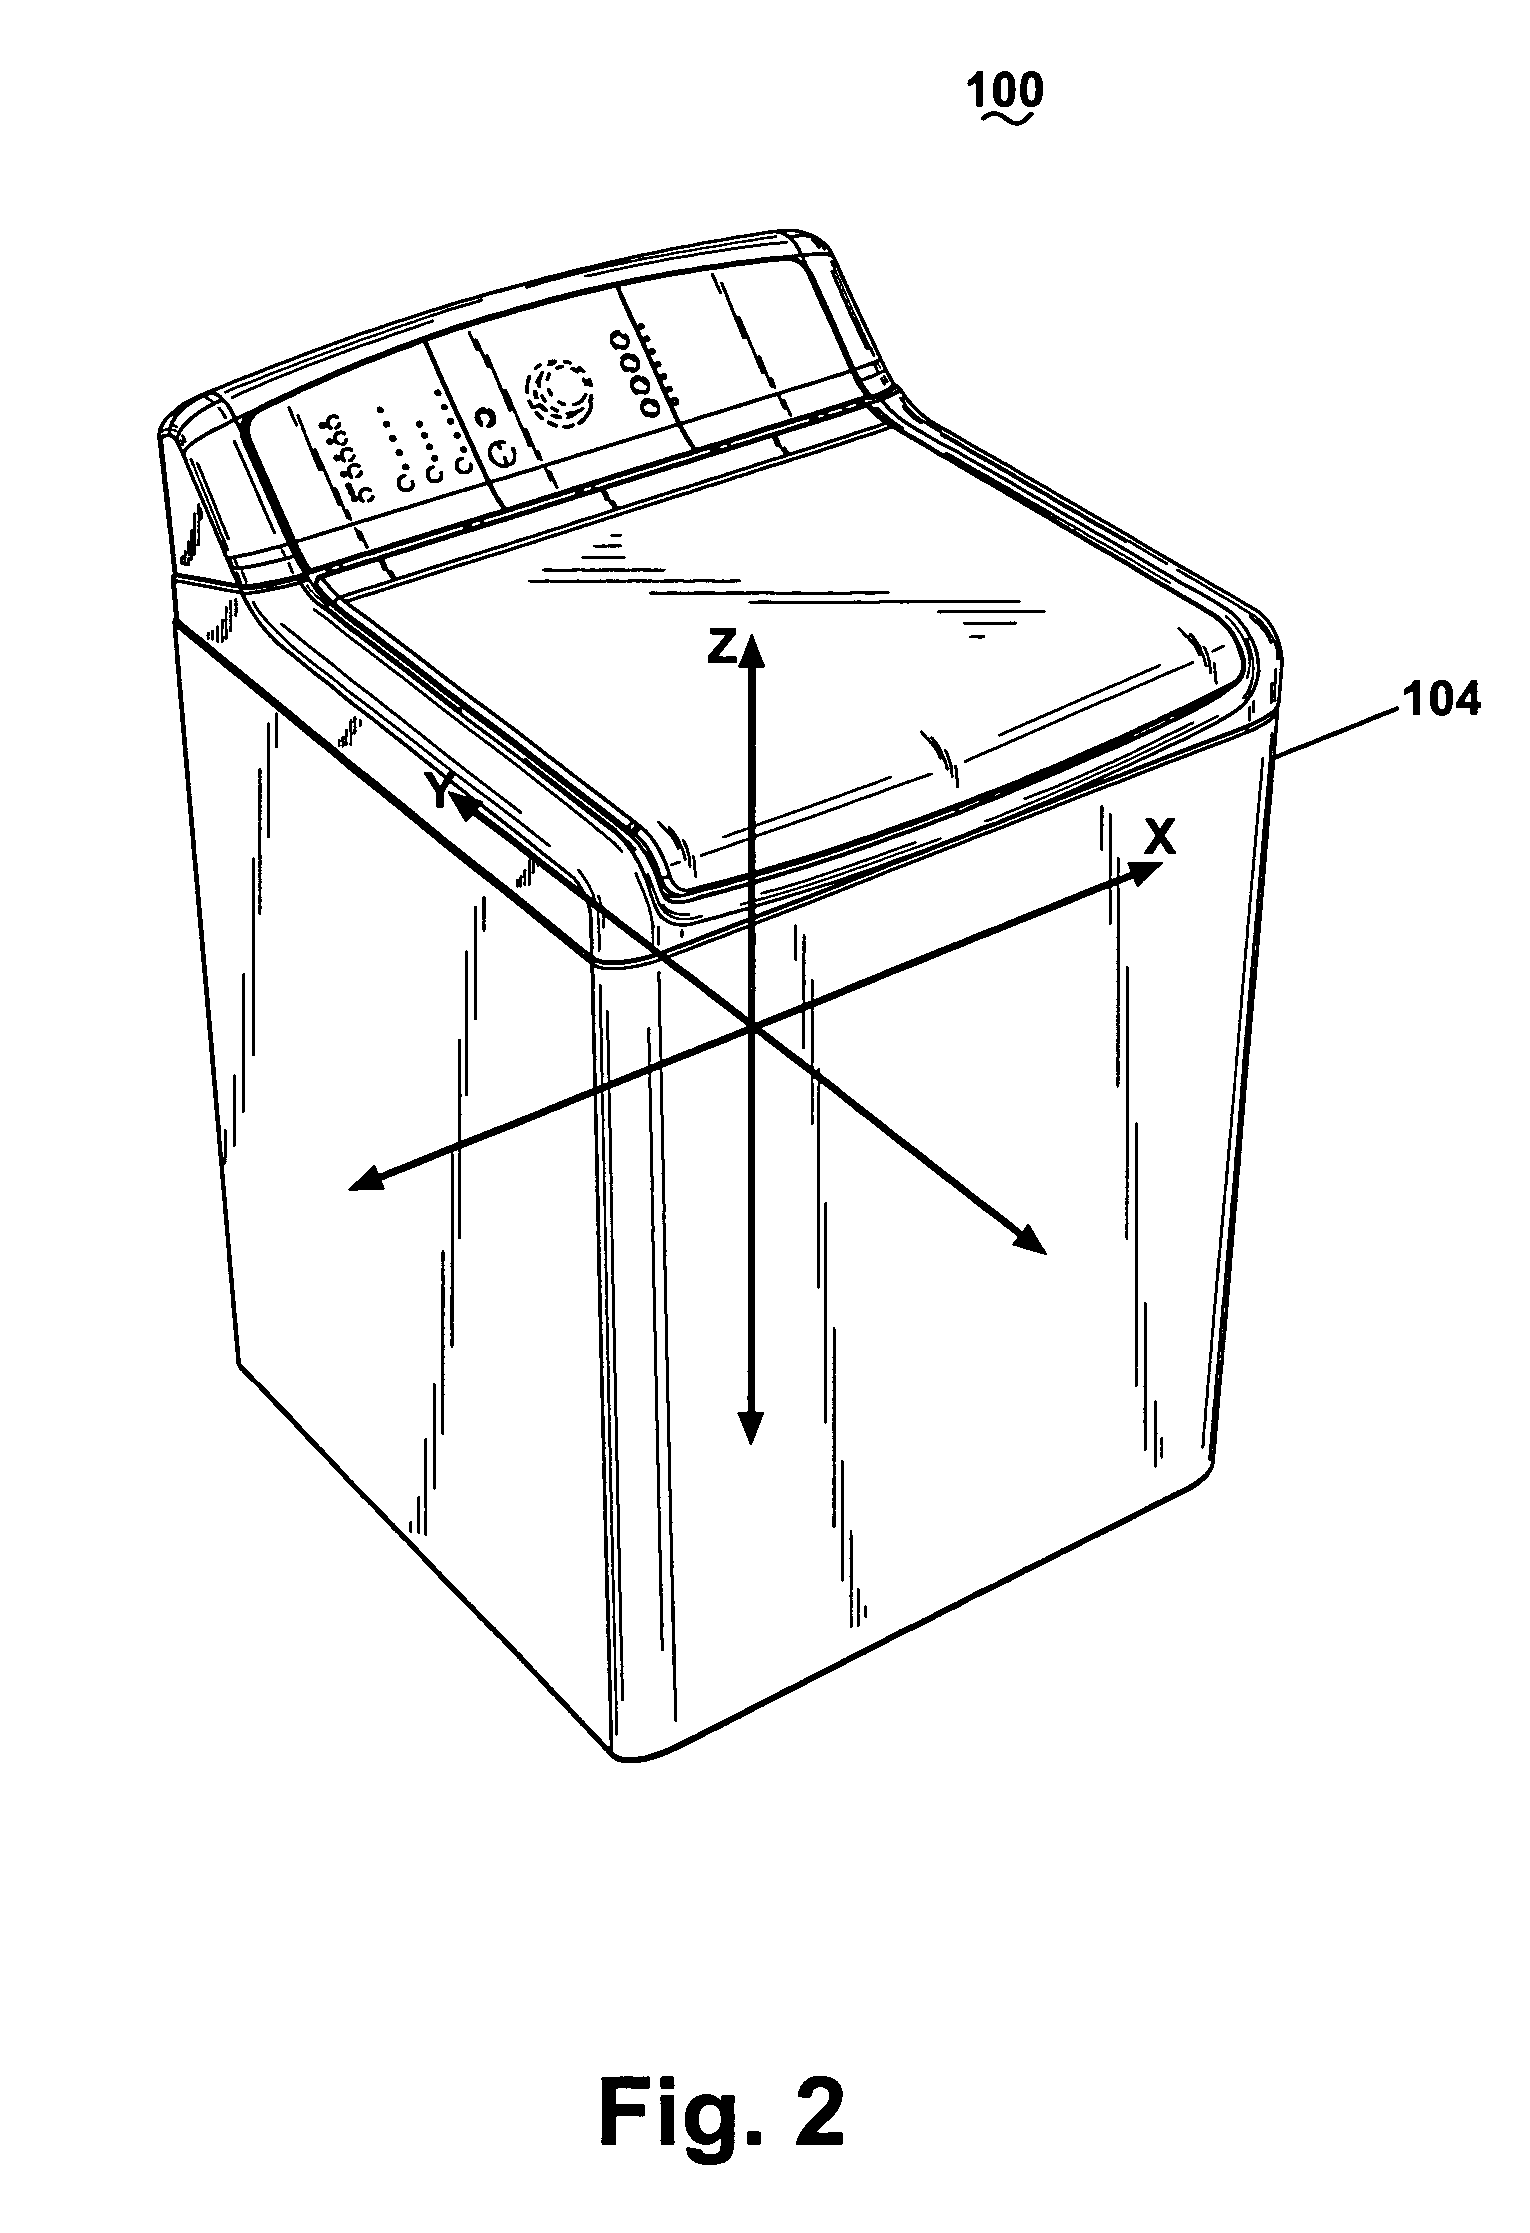 Method of detecting an off-balance condition of a clothes load in a washing machine